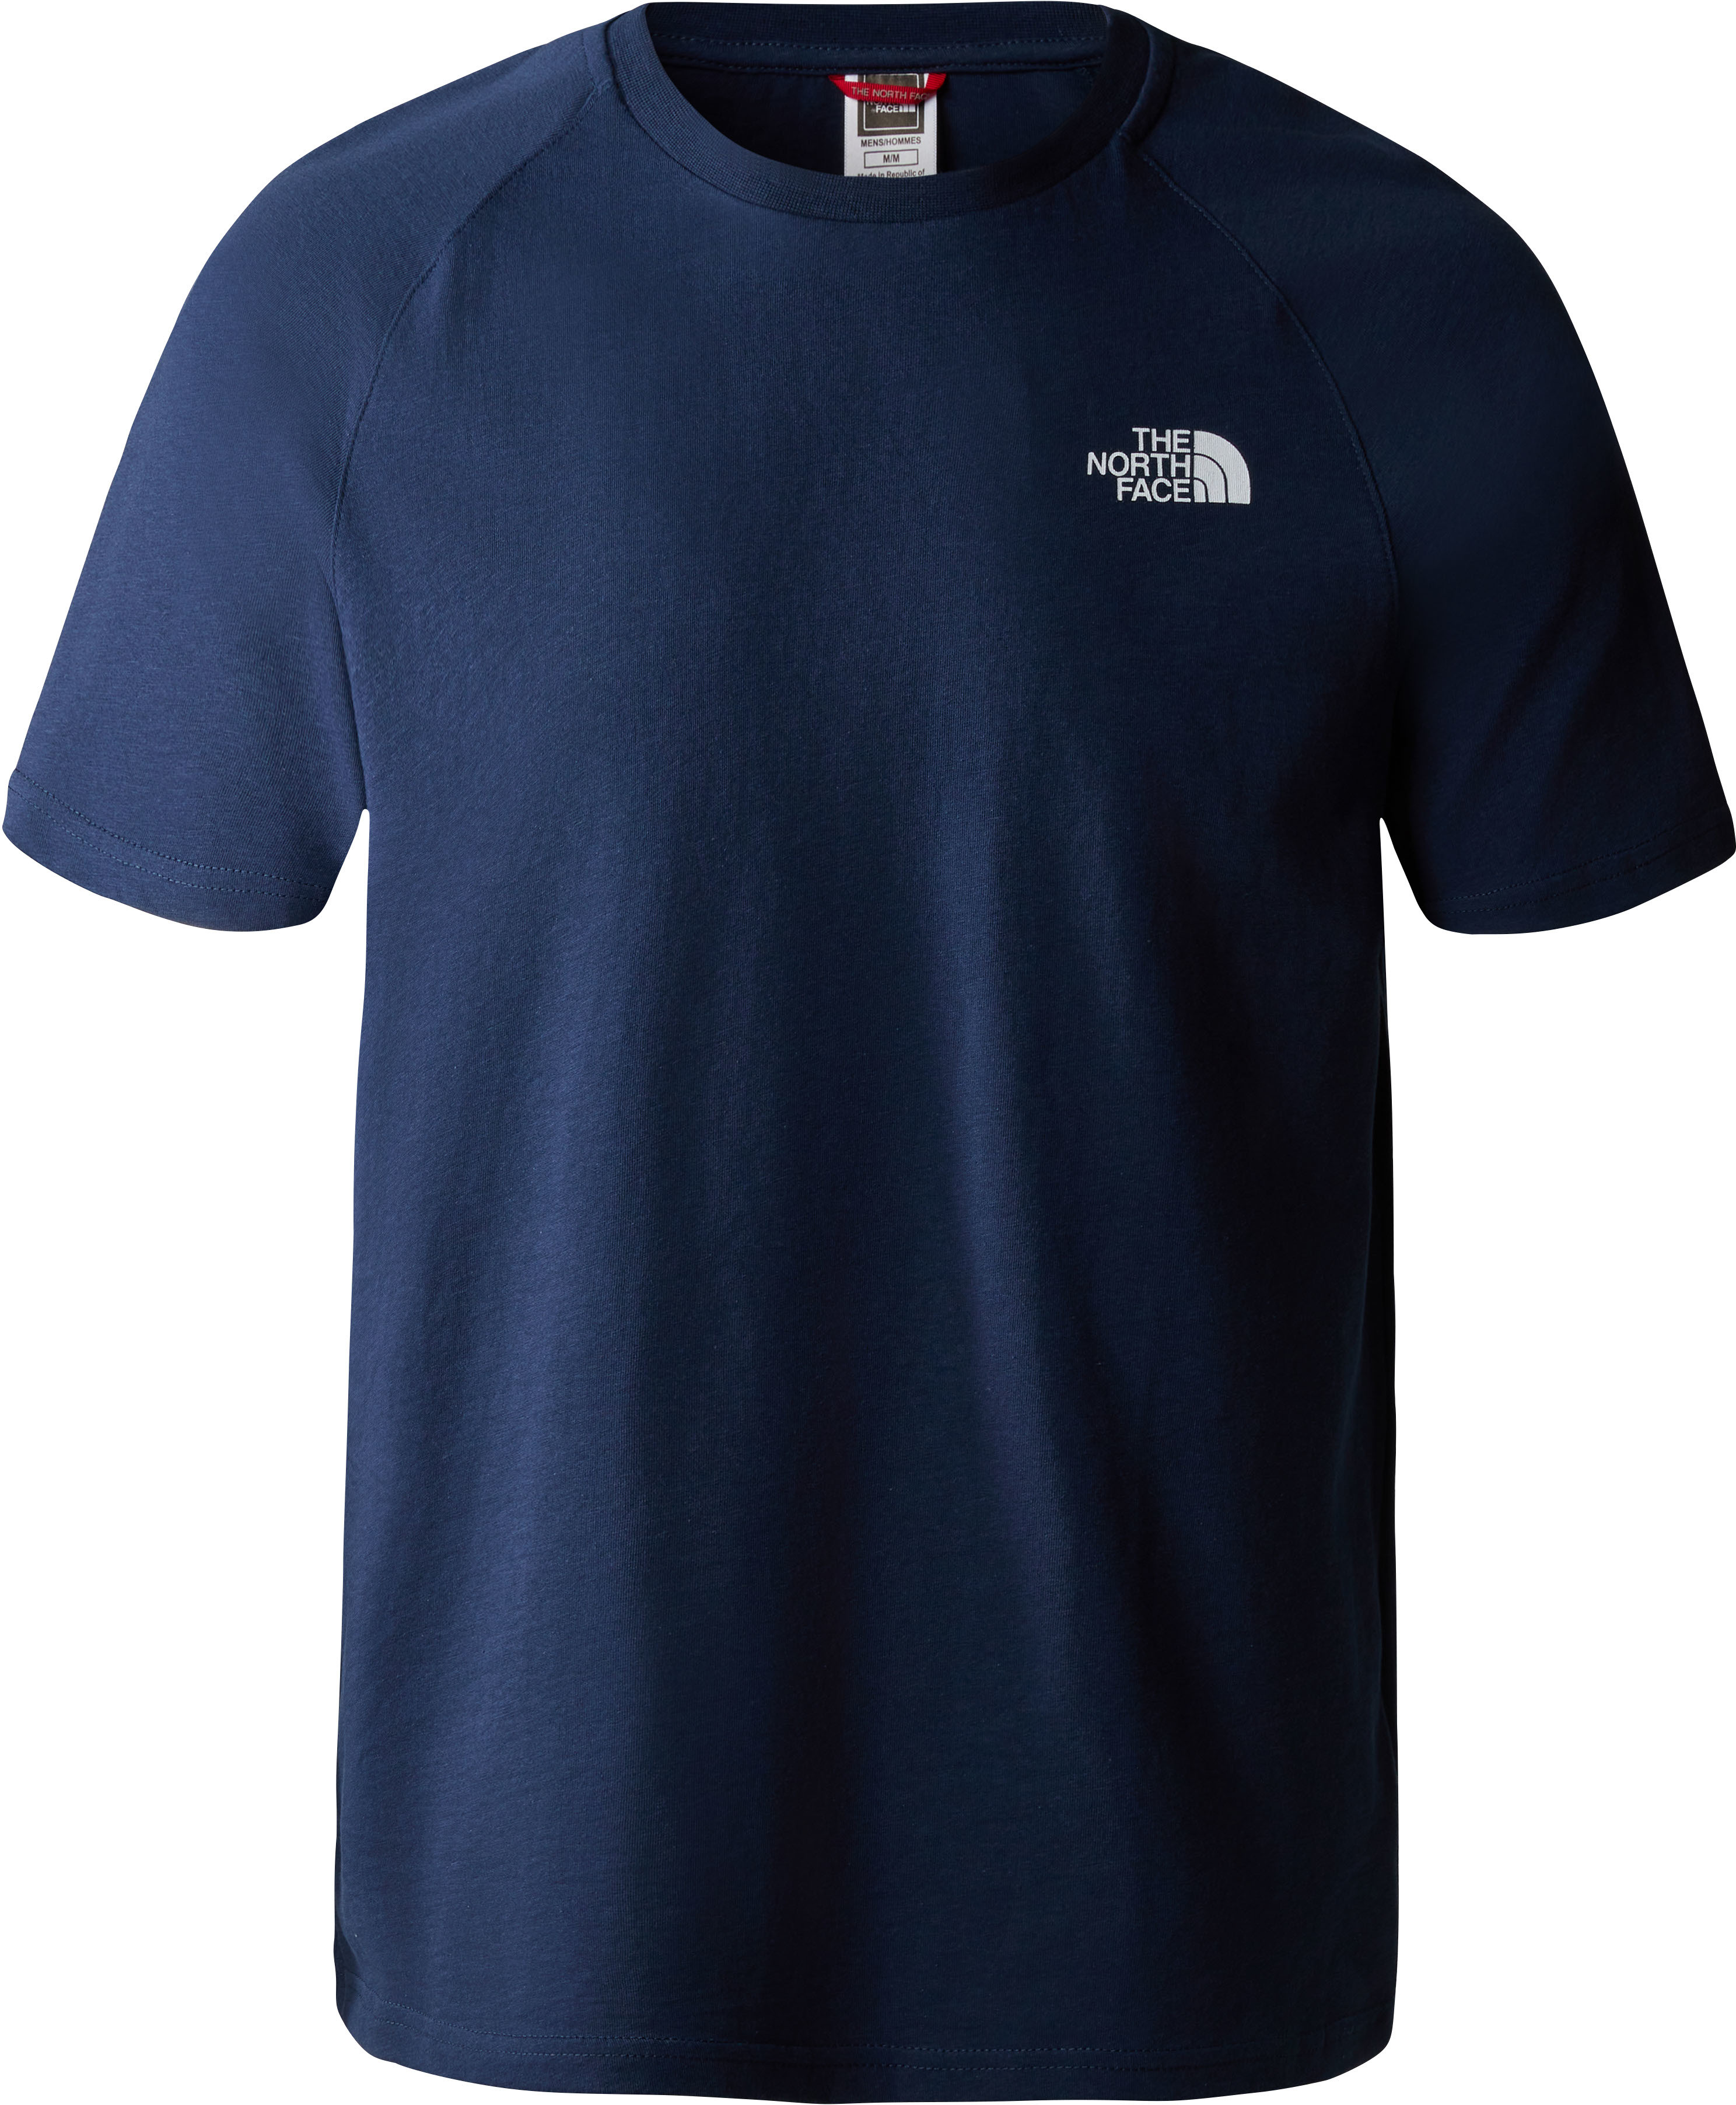 The North Face M S/S North Faces Tee L